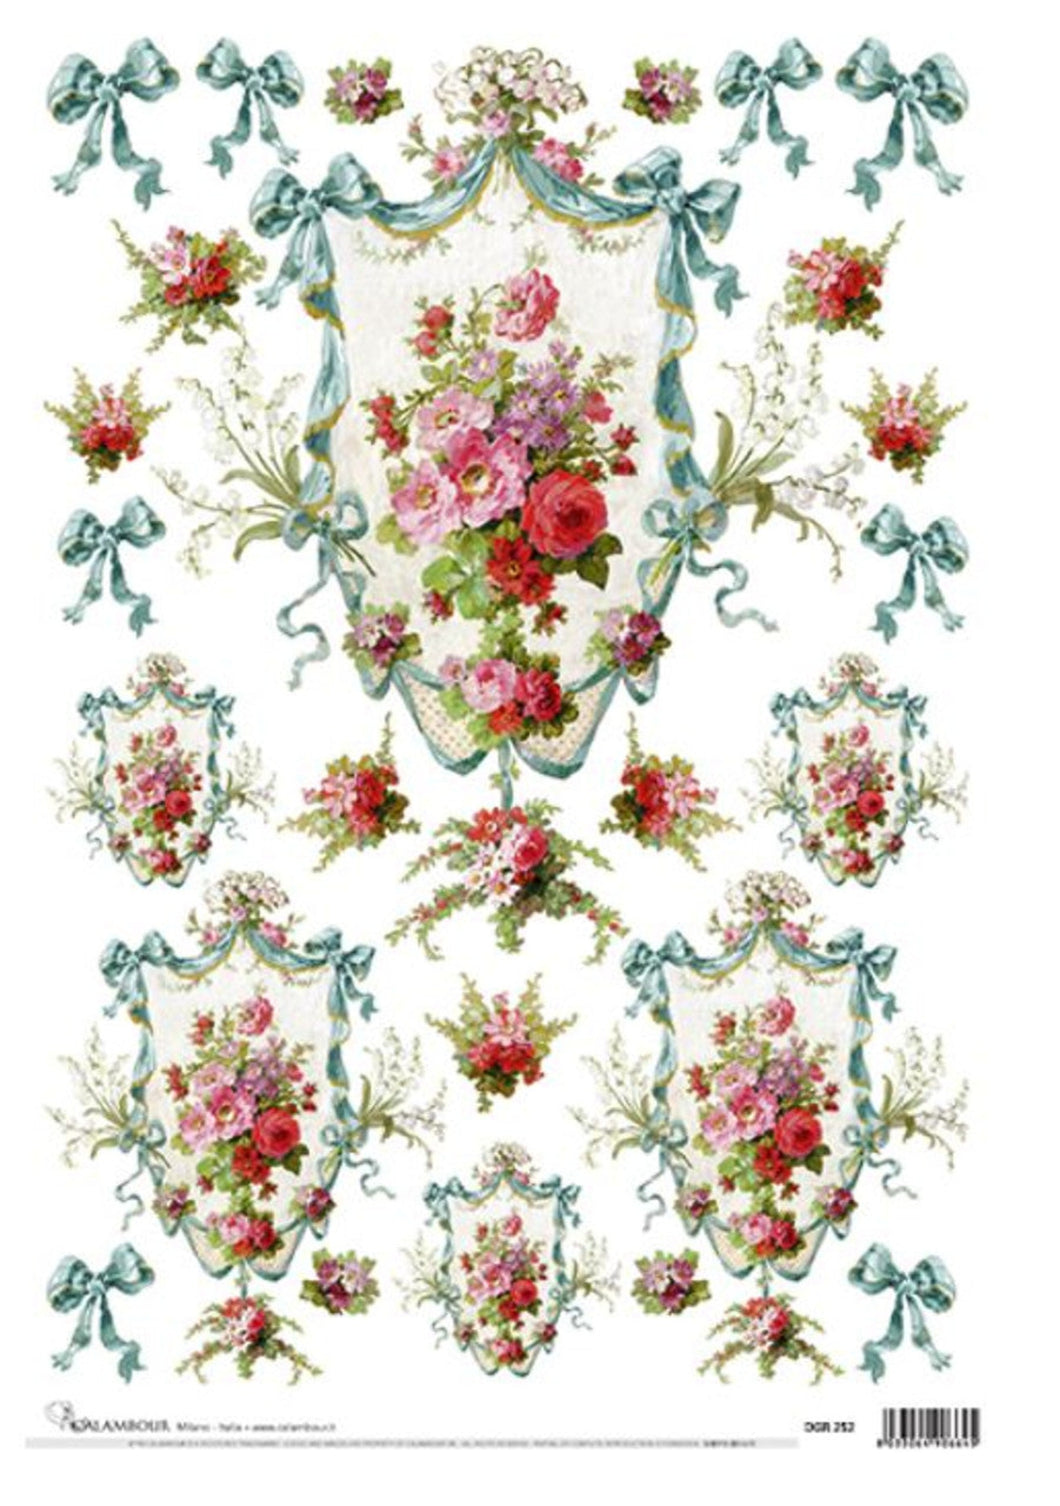 Baroque Bouquets and Swags Decoupage Rice Paper by Calambour Italy, DGR252